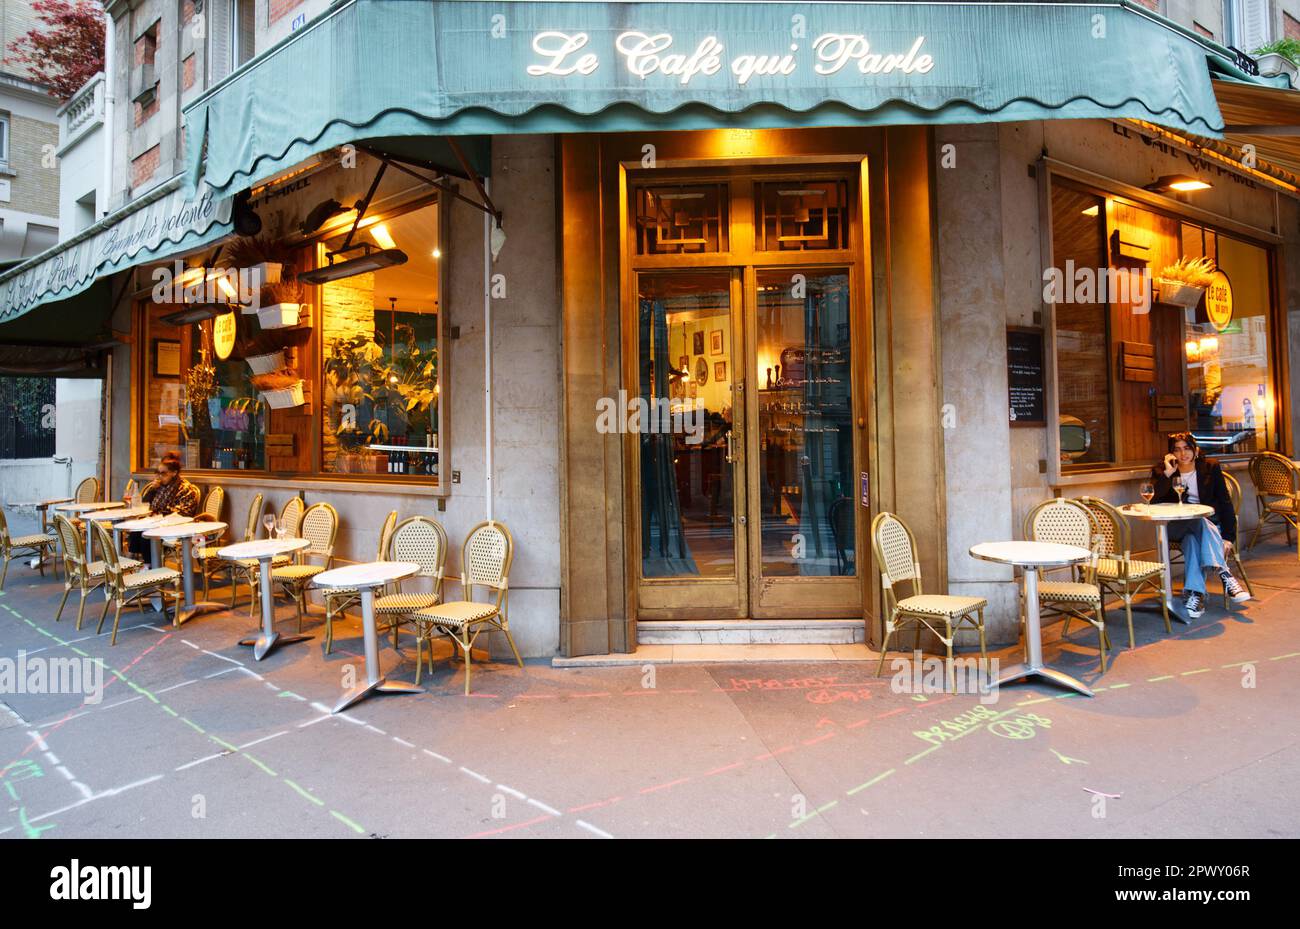 Le cafe qui parle is a traditional French cafe in the middle of Montmartre district, Paris, France. Stock Photo